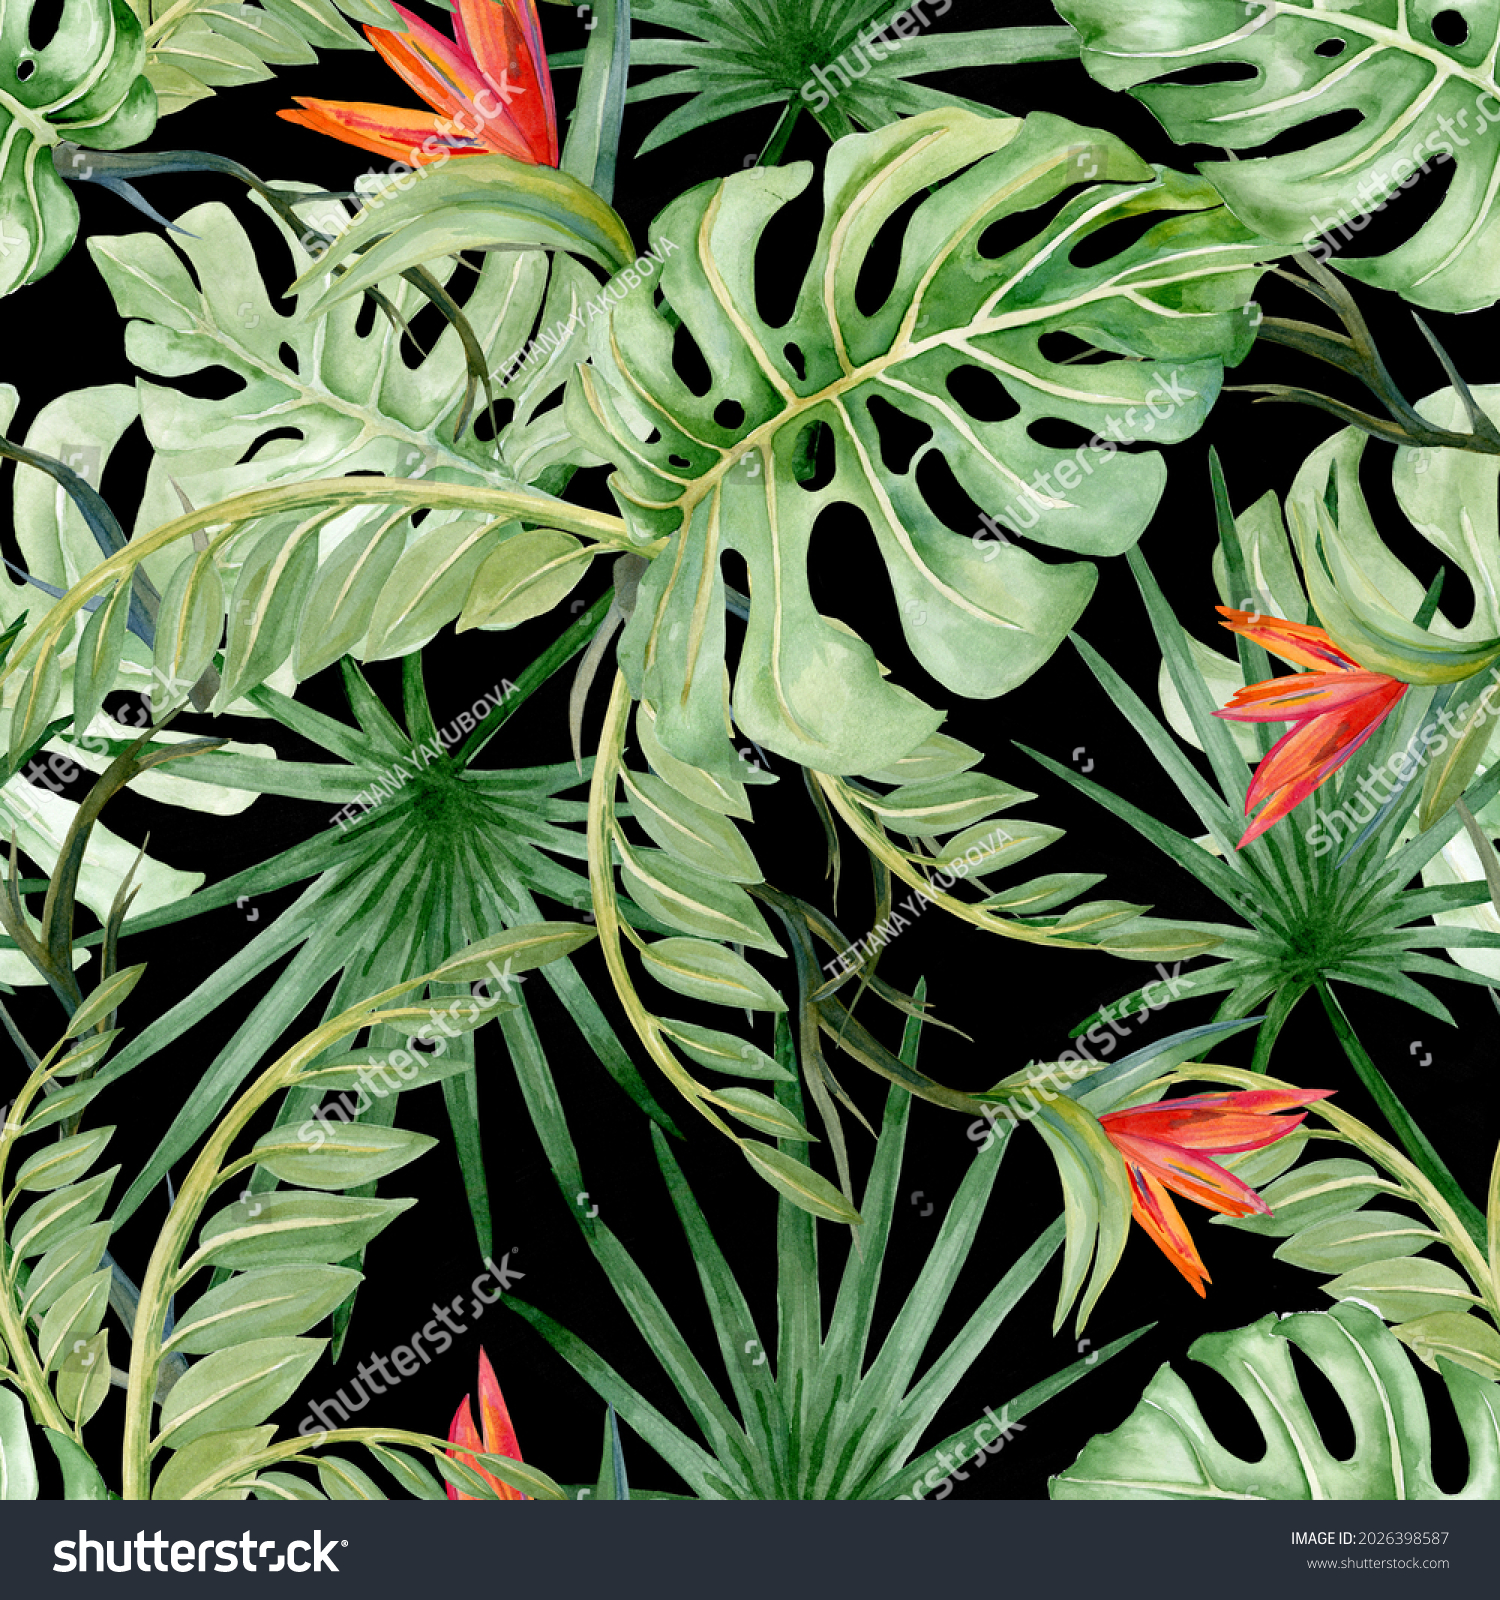 Floral watercolor seamless pattern with tropical plants. Monstera leaves, palms, branches, vines and bright flowers on a black background #2026398587